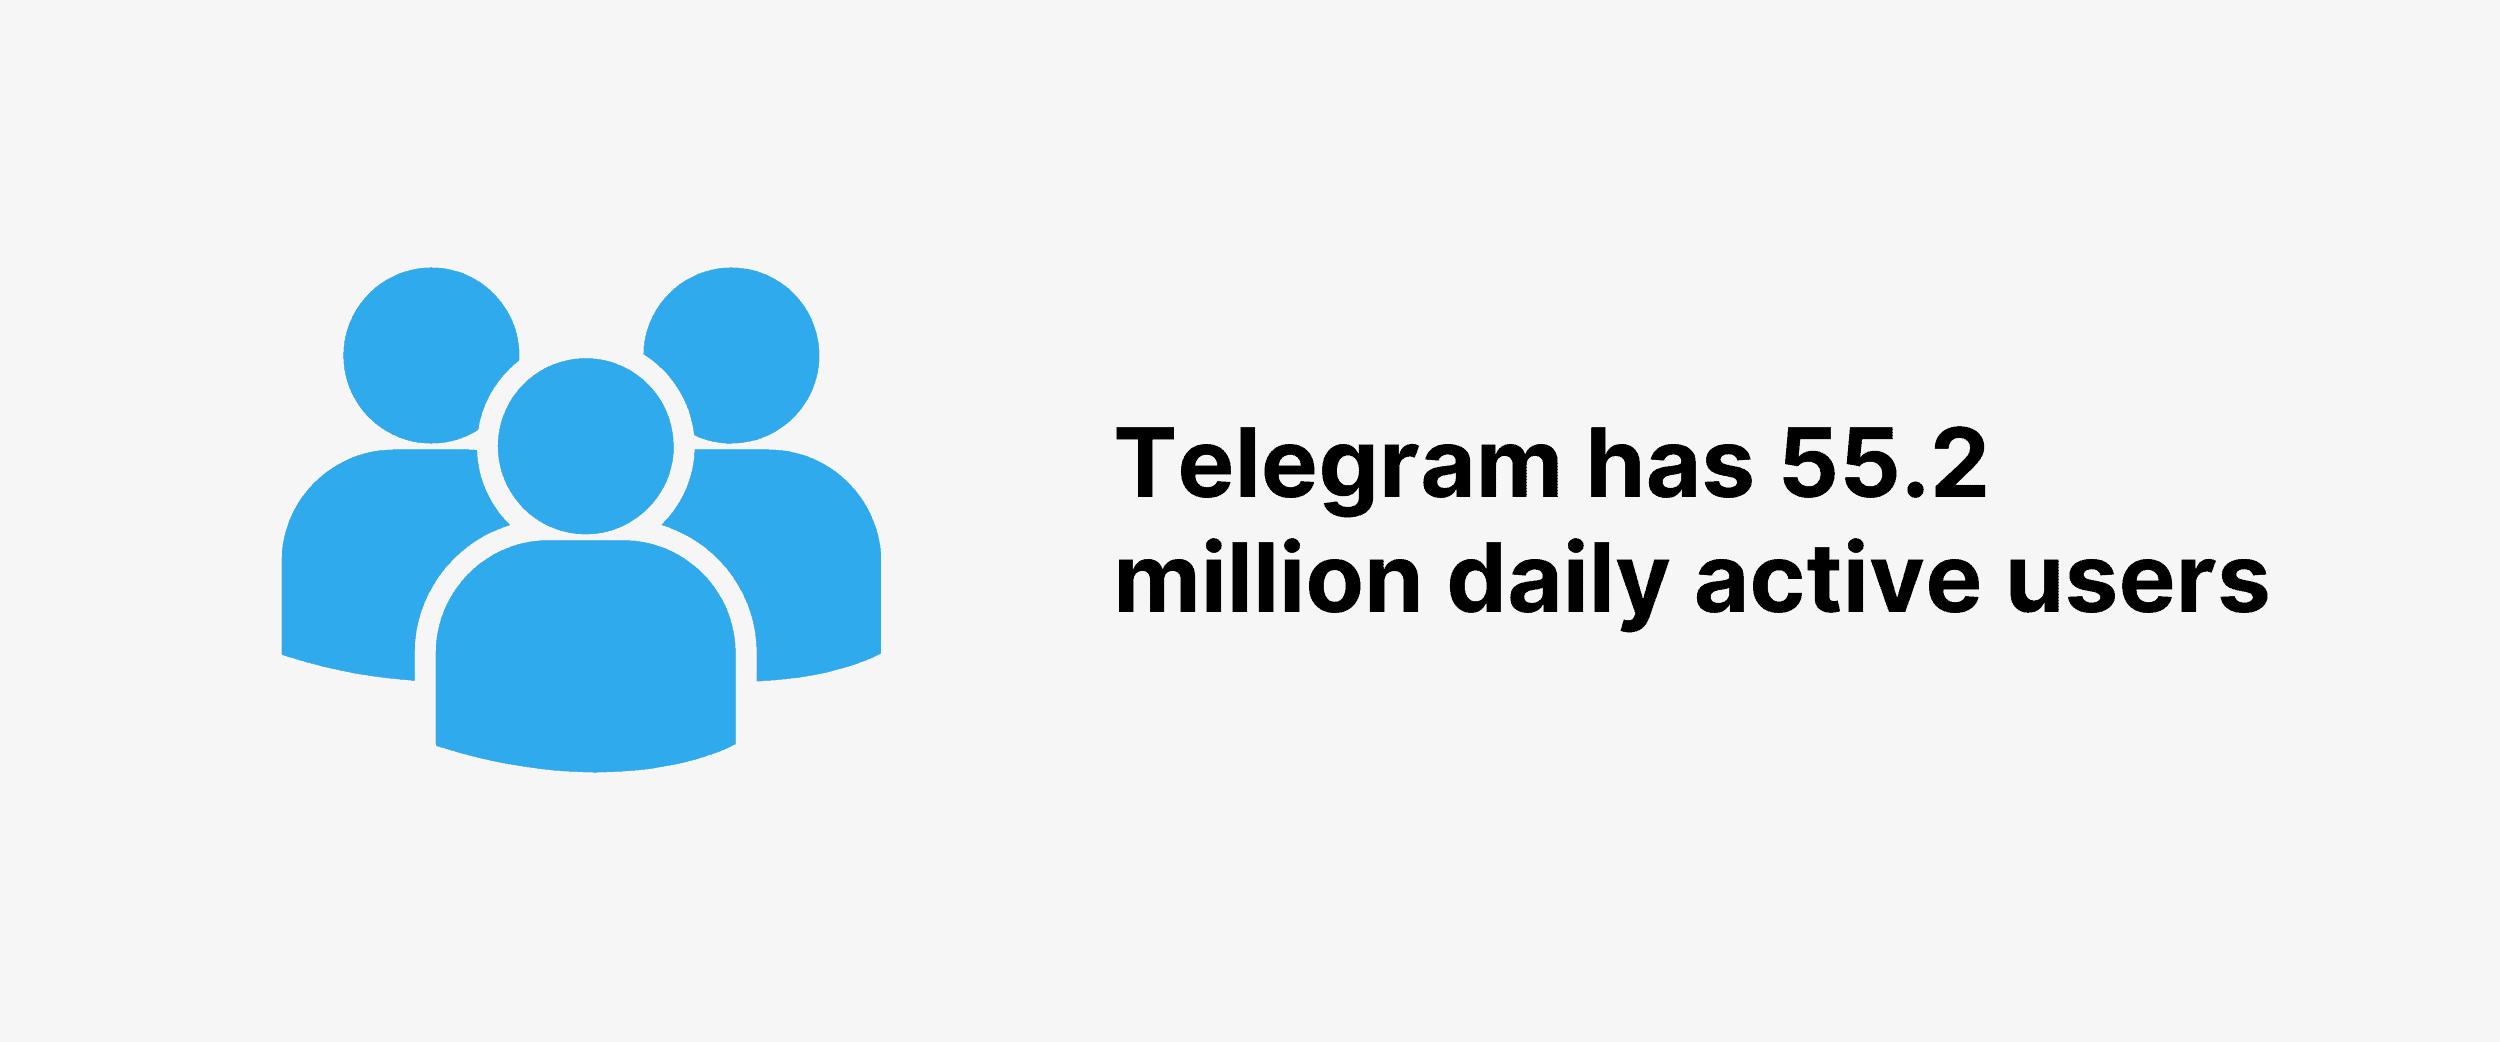 Telegram has 55.2 million daily active users